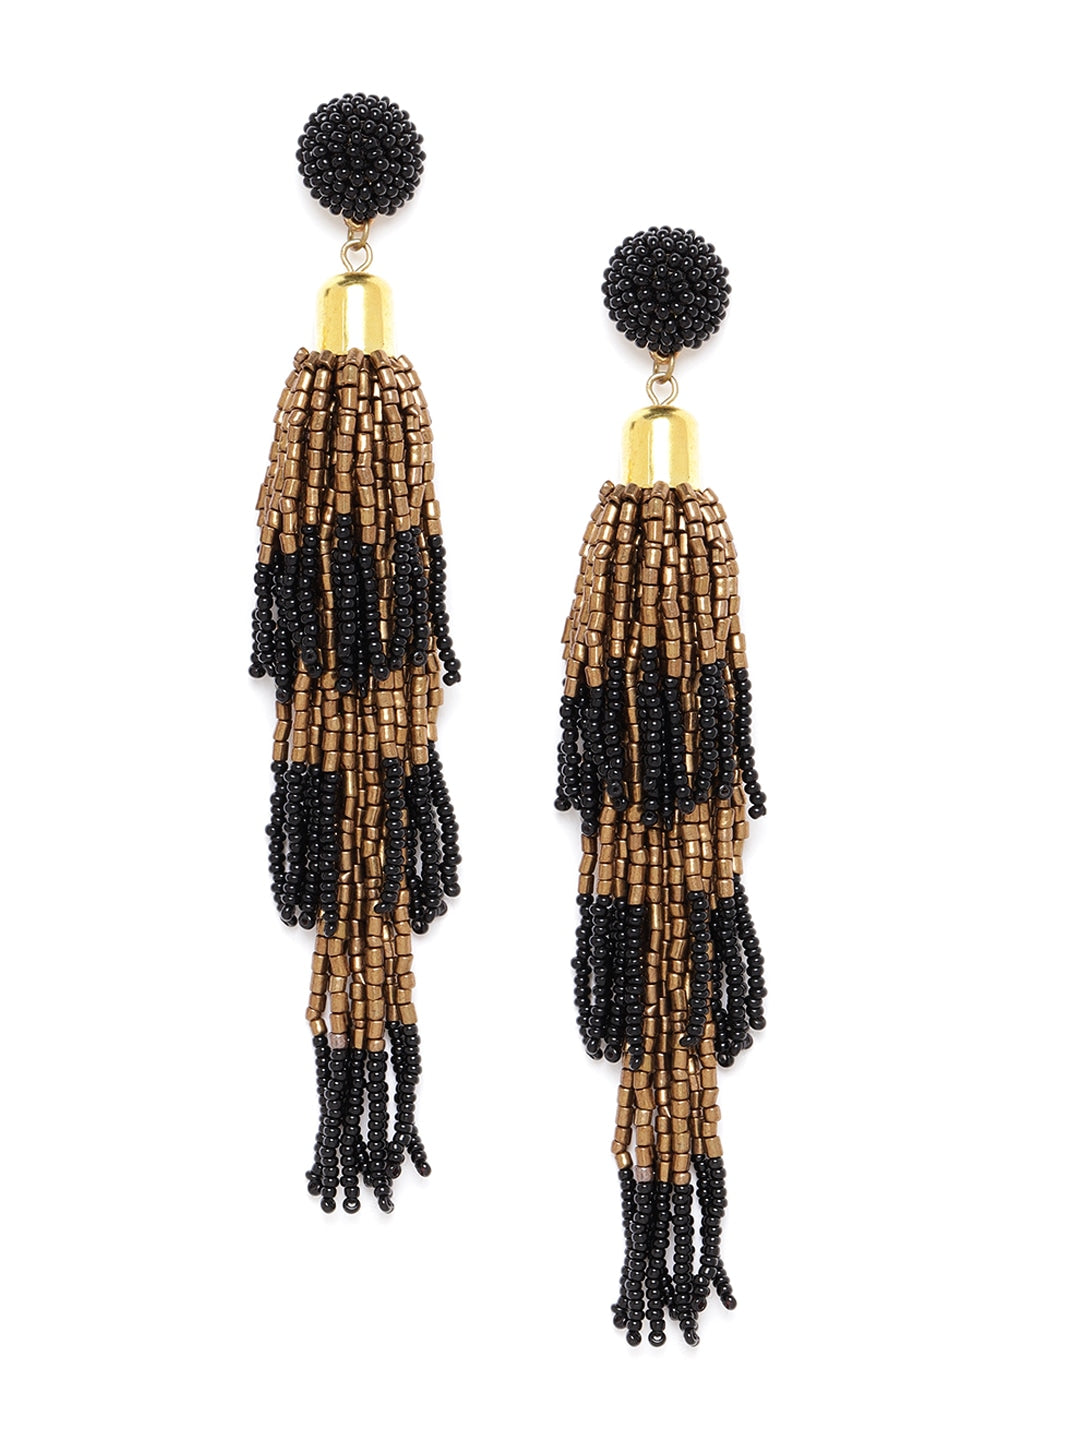 RICHEERA Black & Bronze-Toned Gold-Plated Beaded Tasselled Contemporary Drop Earrings